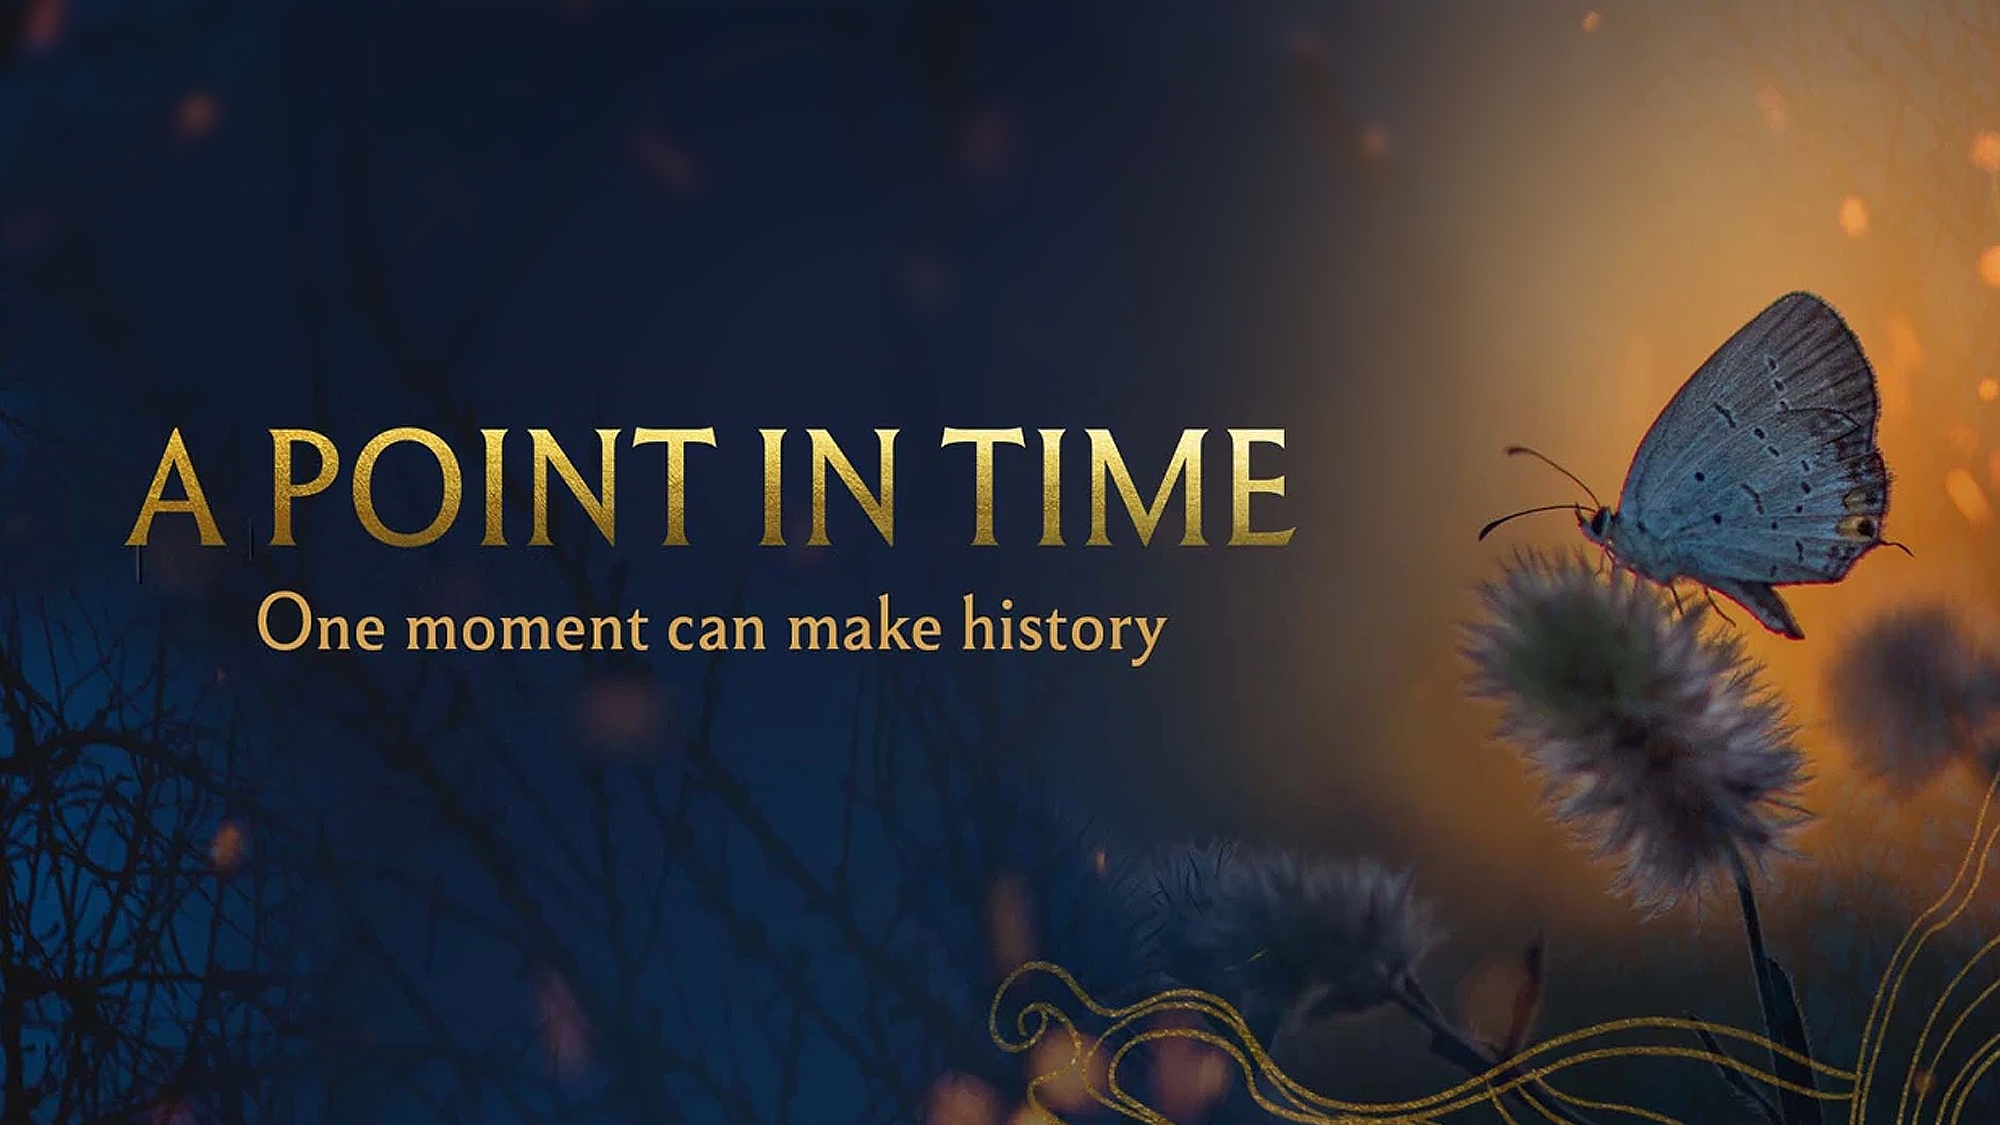 An illustrated image showing a buttlerfly on a dark background. Text on the image says "A Point in Time, One Moment can Make History."